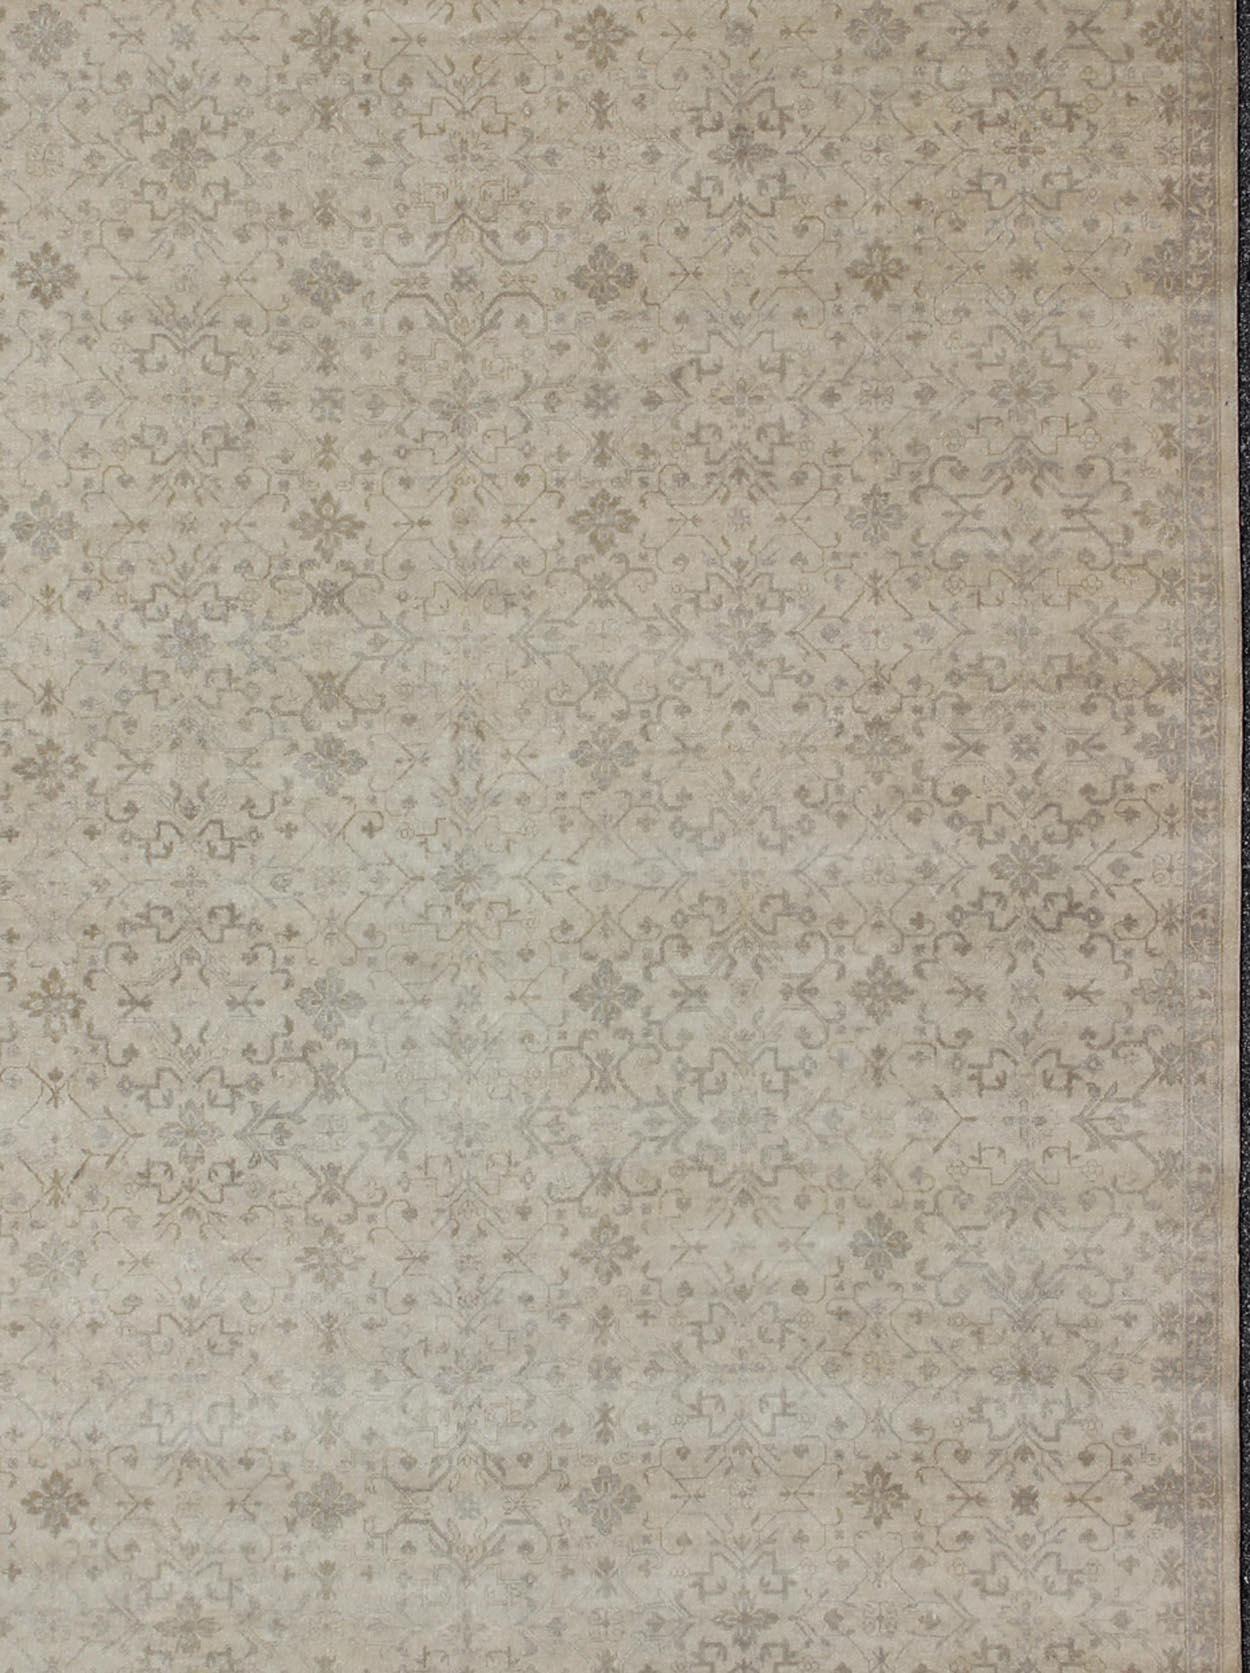 This modern hand-knotted Khotan features a geometric, all-over design flanked by a repeating pattern in the border. The entirety of the piece is rendered in light tones, which makes it a versatile rug, well-suited for a wide variety of